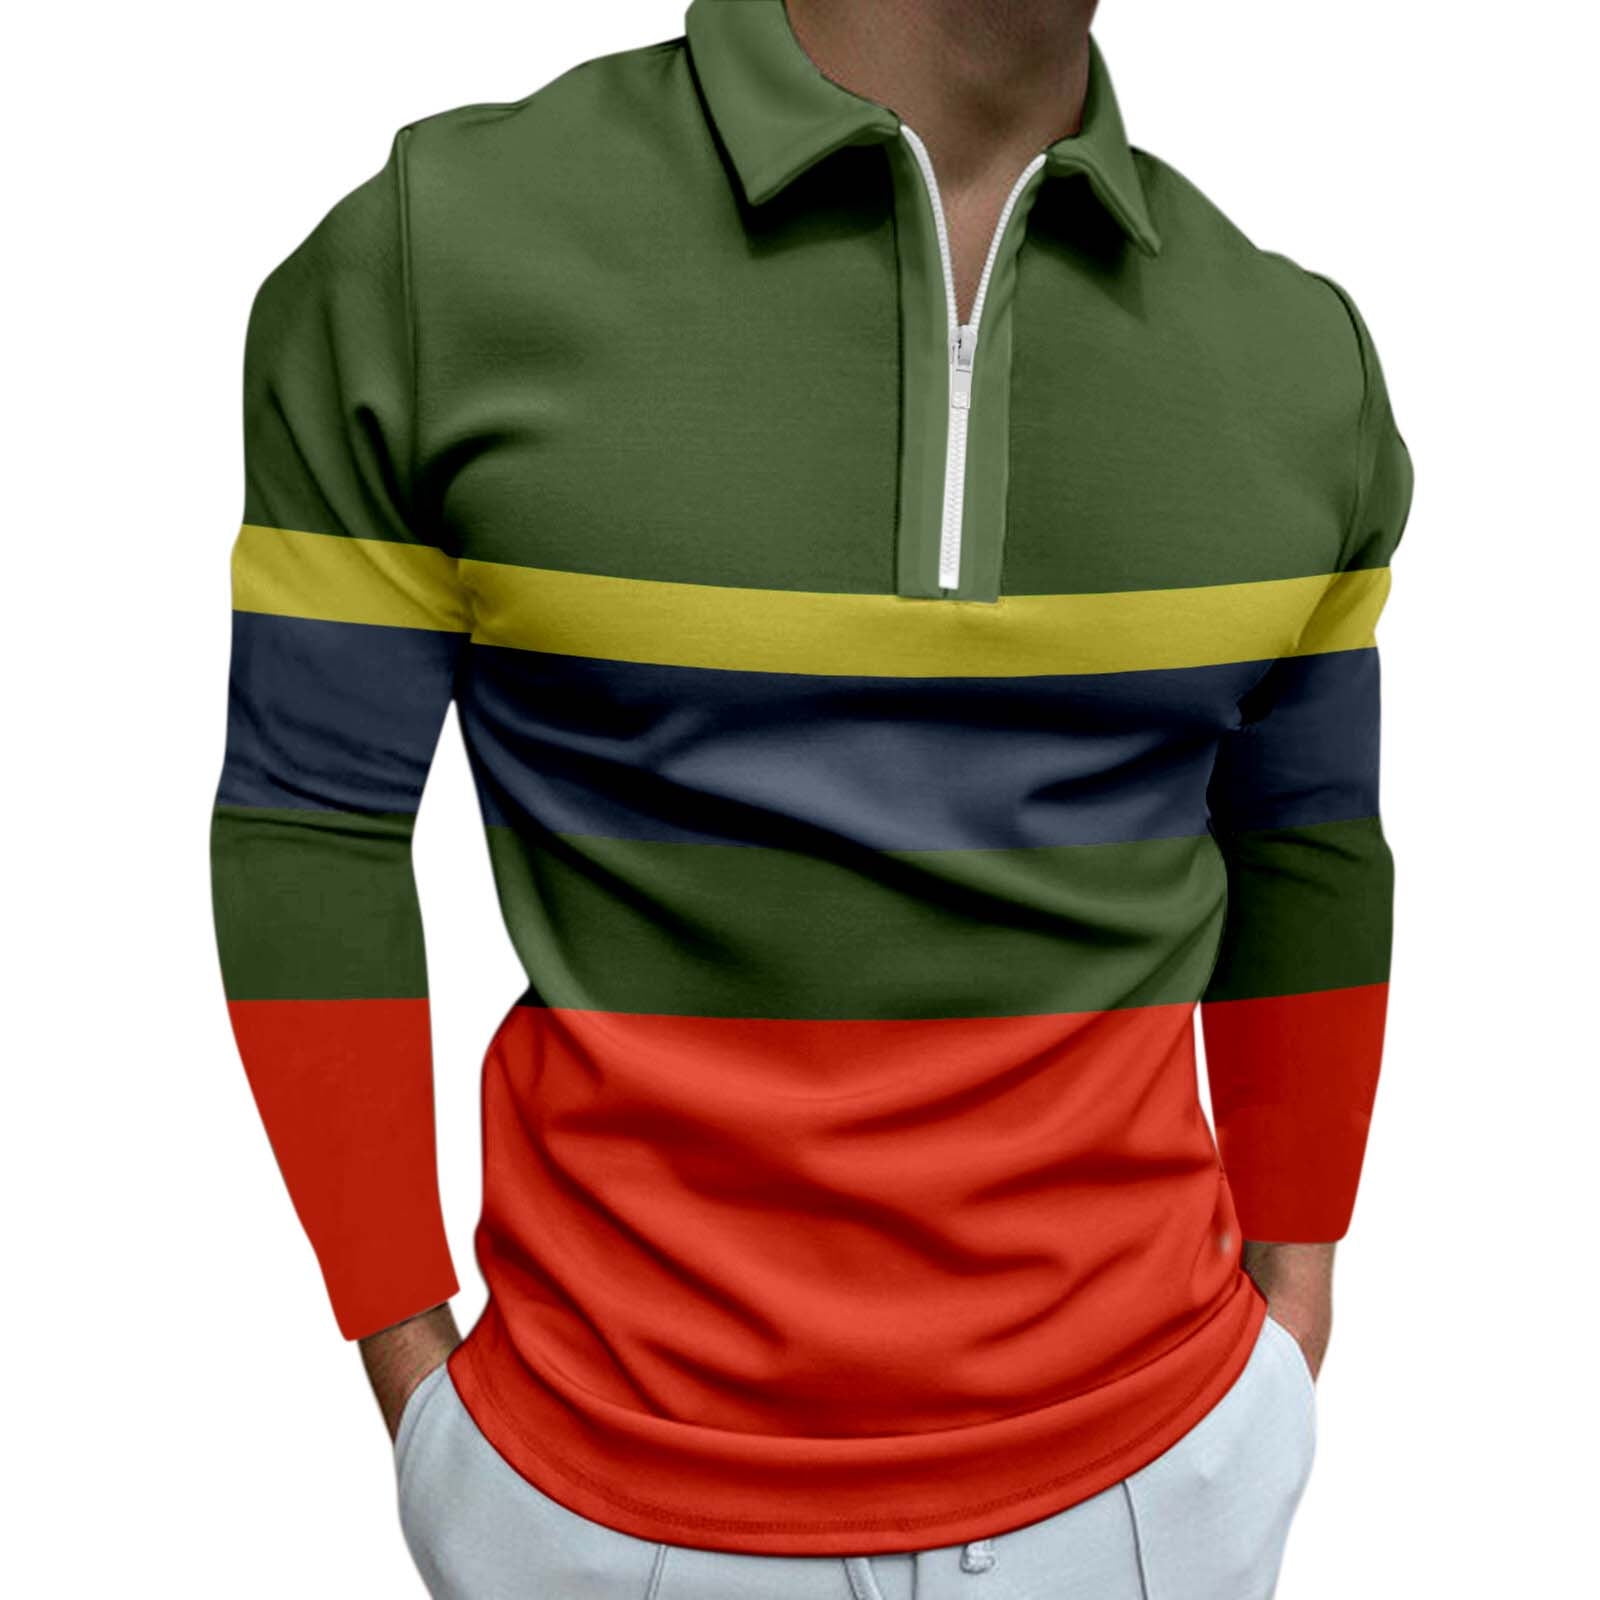 Ketyyh-chn99 Men's Polo Shirts Long Sleeve Striped Casual Collared Golf ...